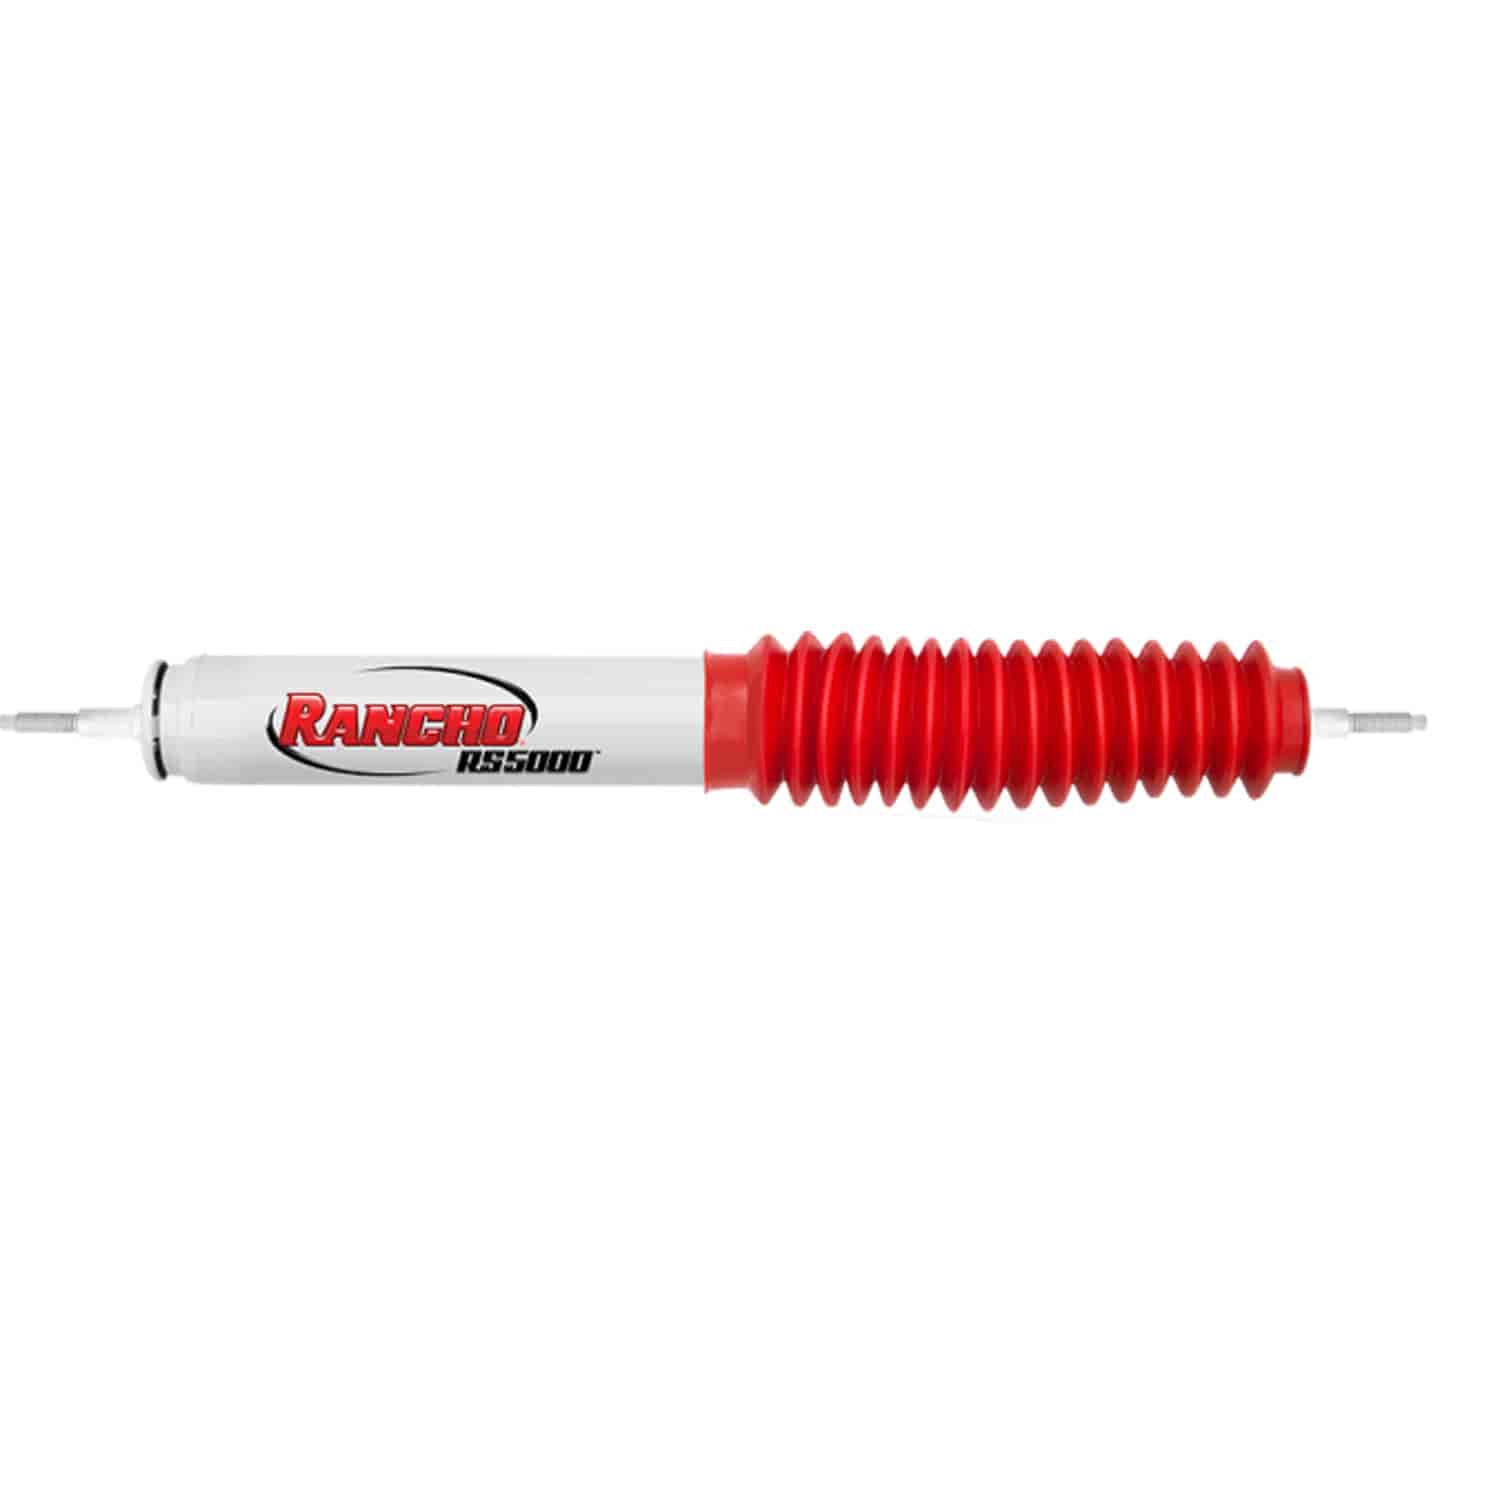 RS5000 Front Shock Absorber Fits Toyota Land Cruiser